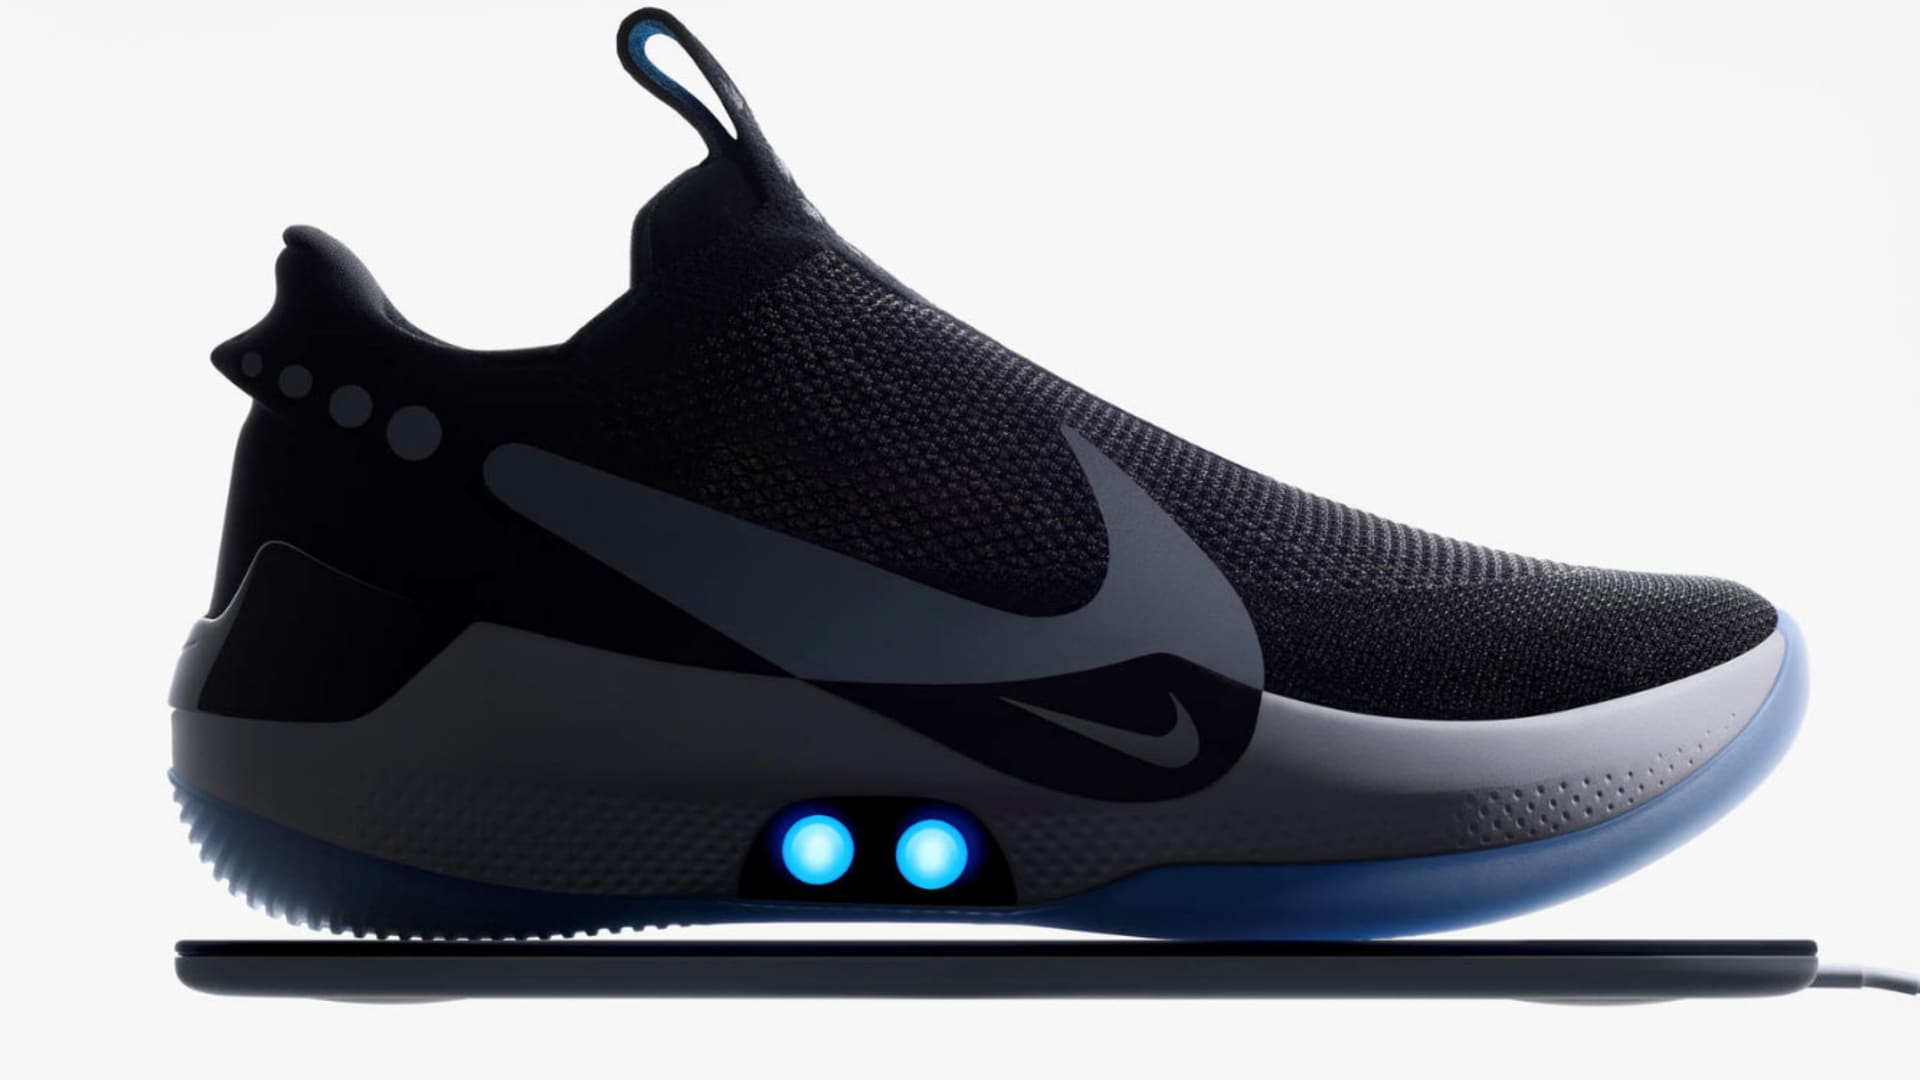 detectie Vete het beleid You can lace Nike's Adapt BB shoes with a smartphone app